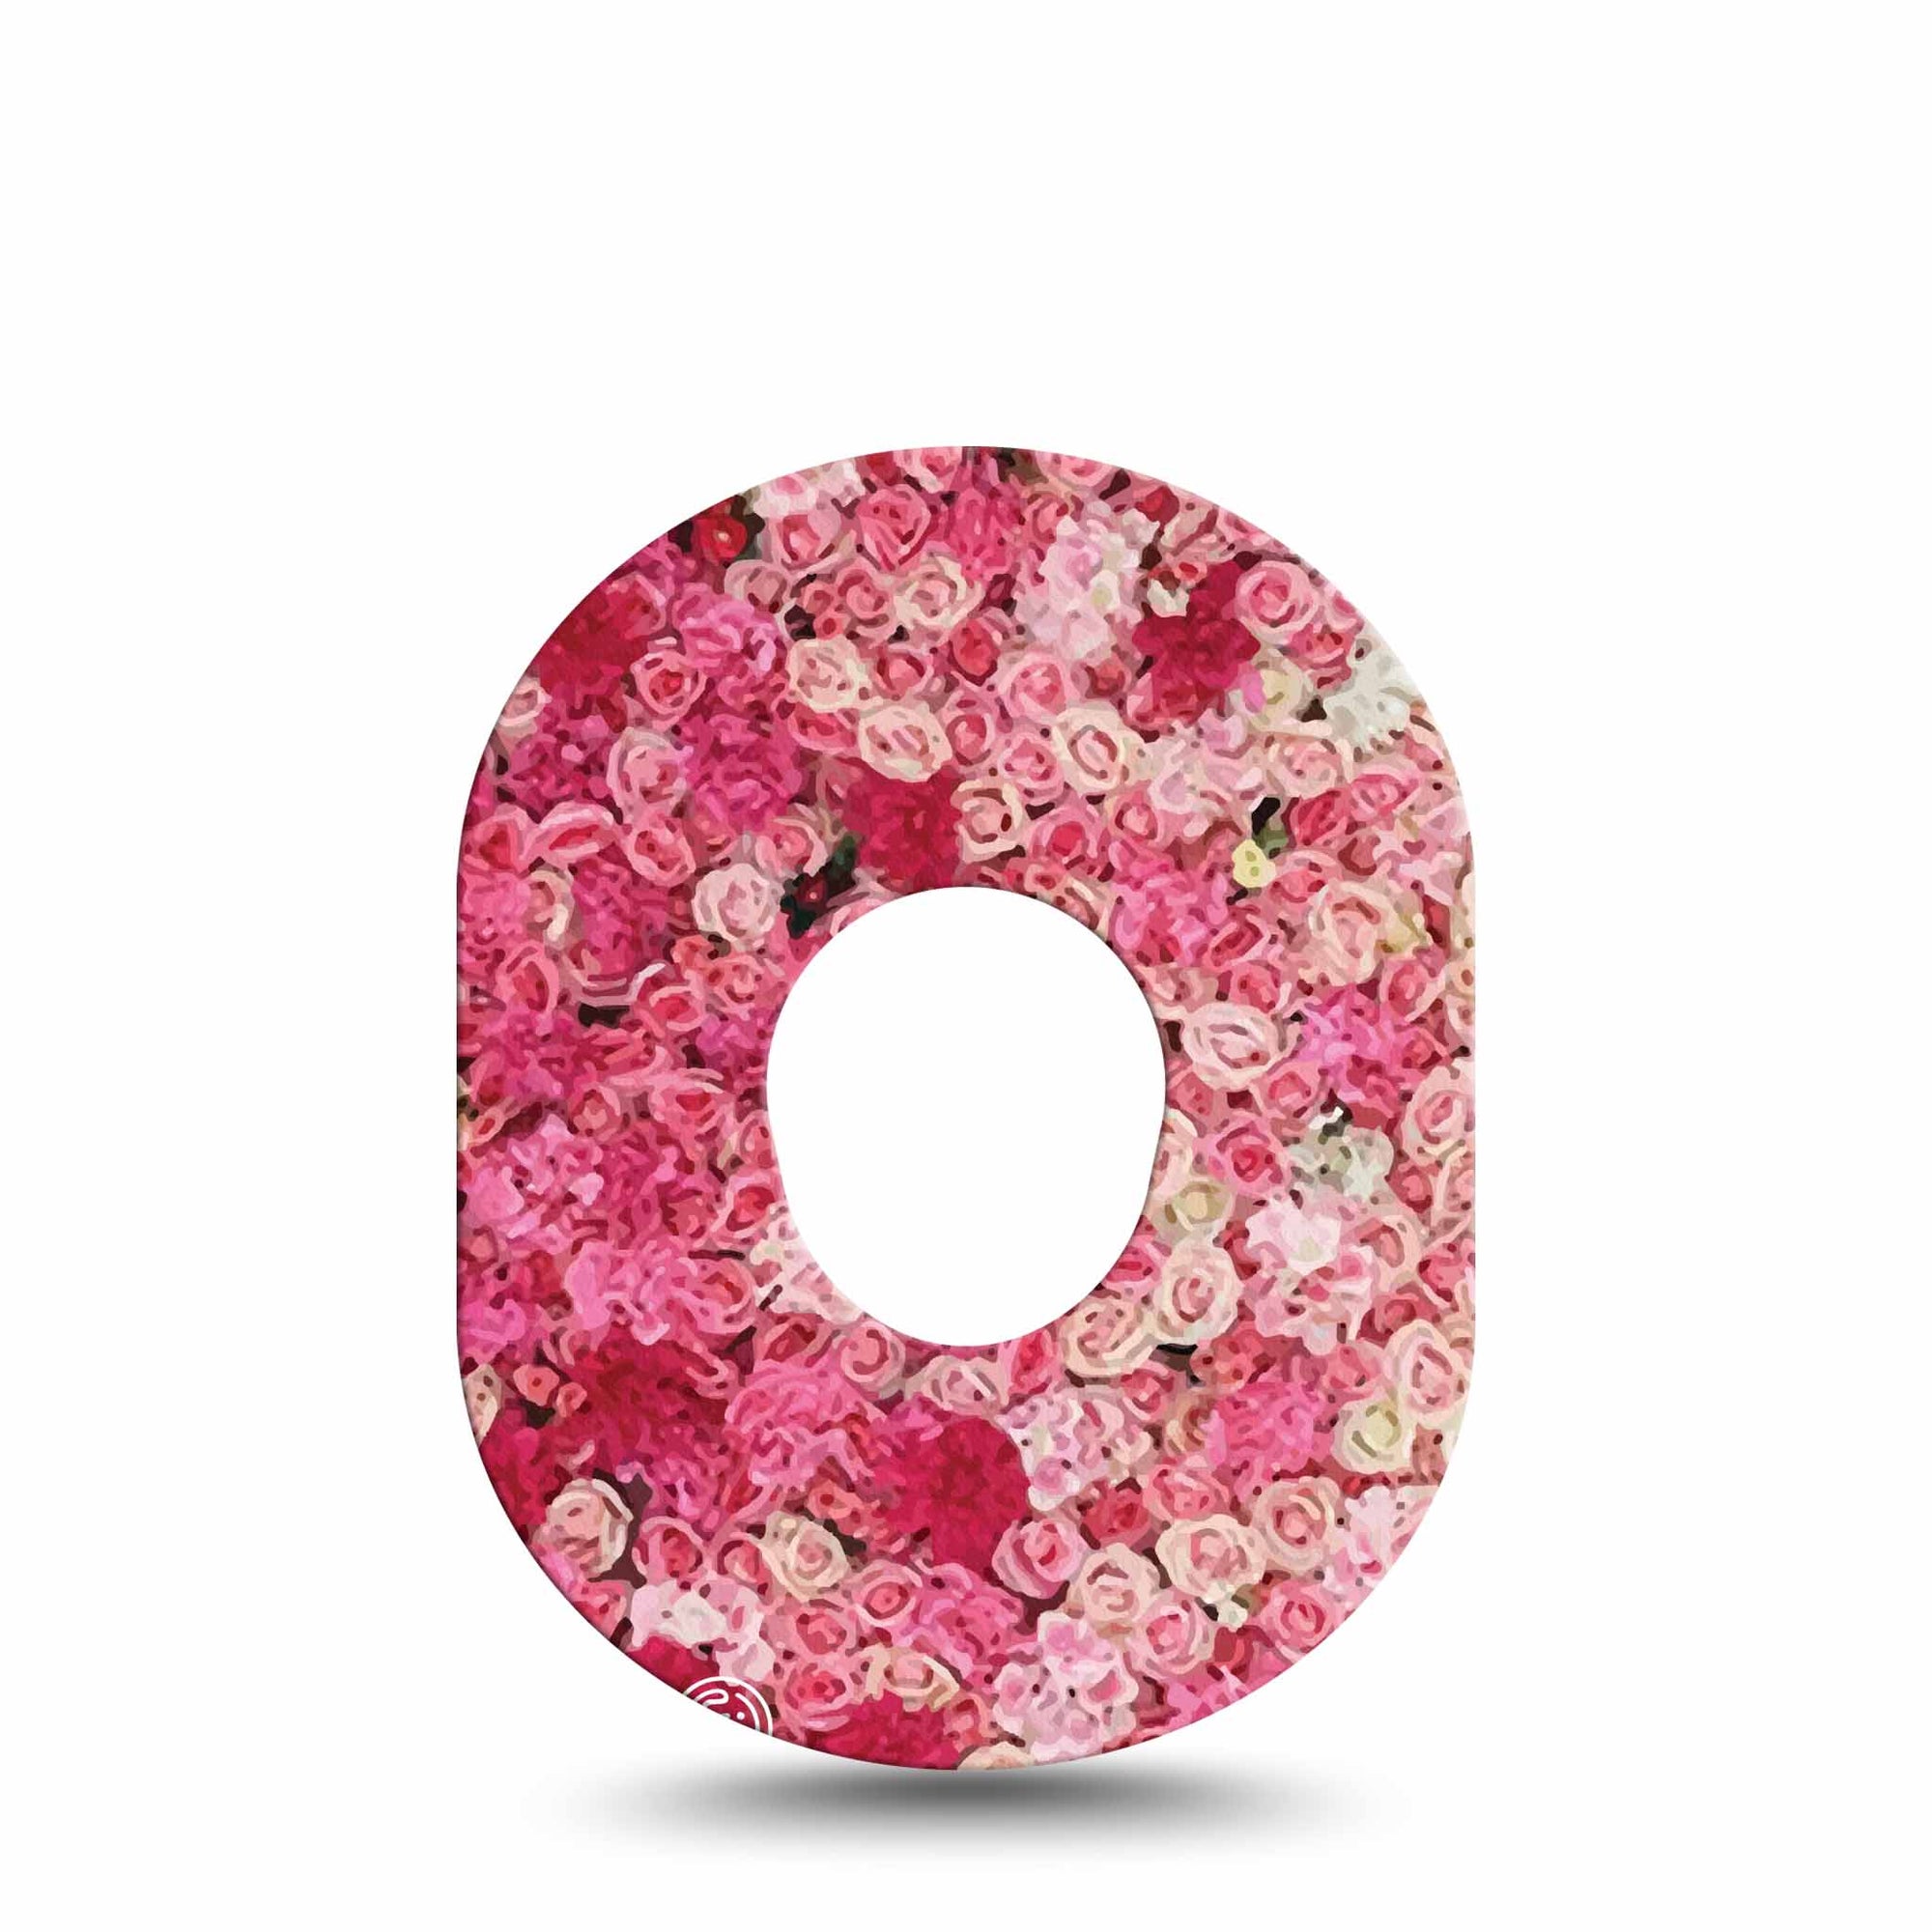 ExpressionMed Flower Wall Dexcom G7 Tape, Single, Pink Variety Ombre Roses CGM Patch Design, Dexcom Stelo Glucose Biosensor System